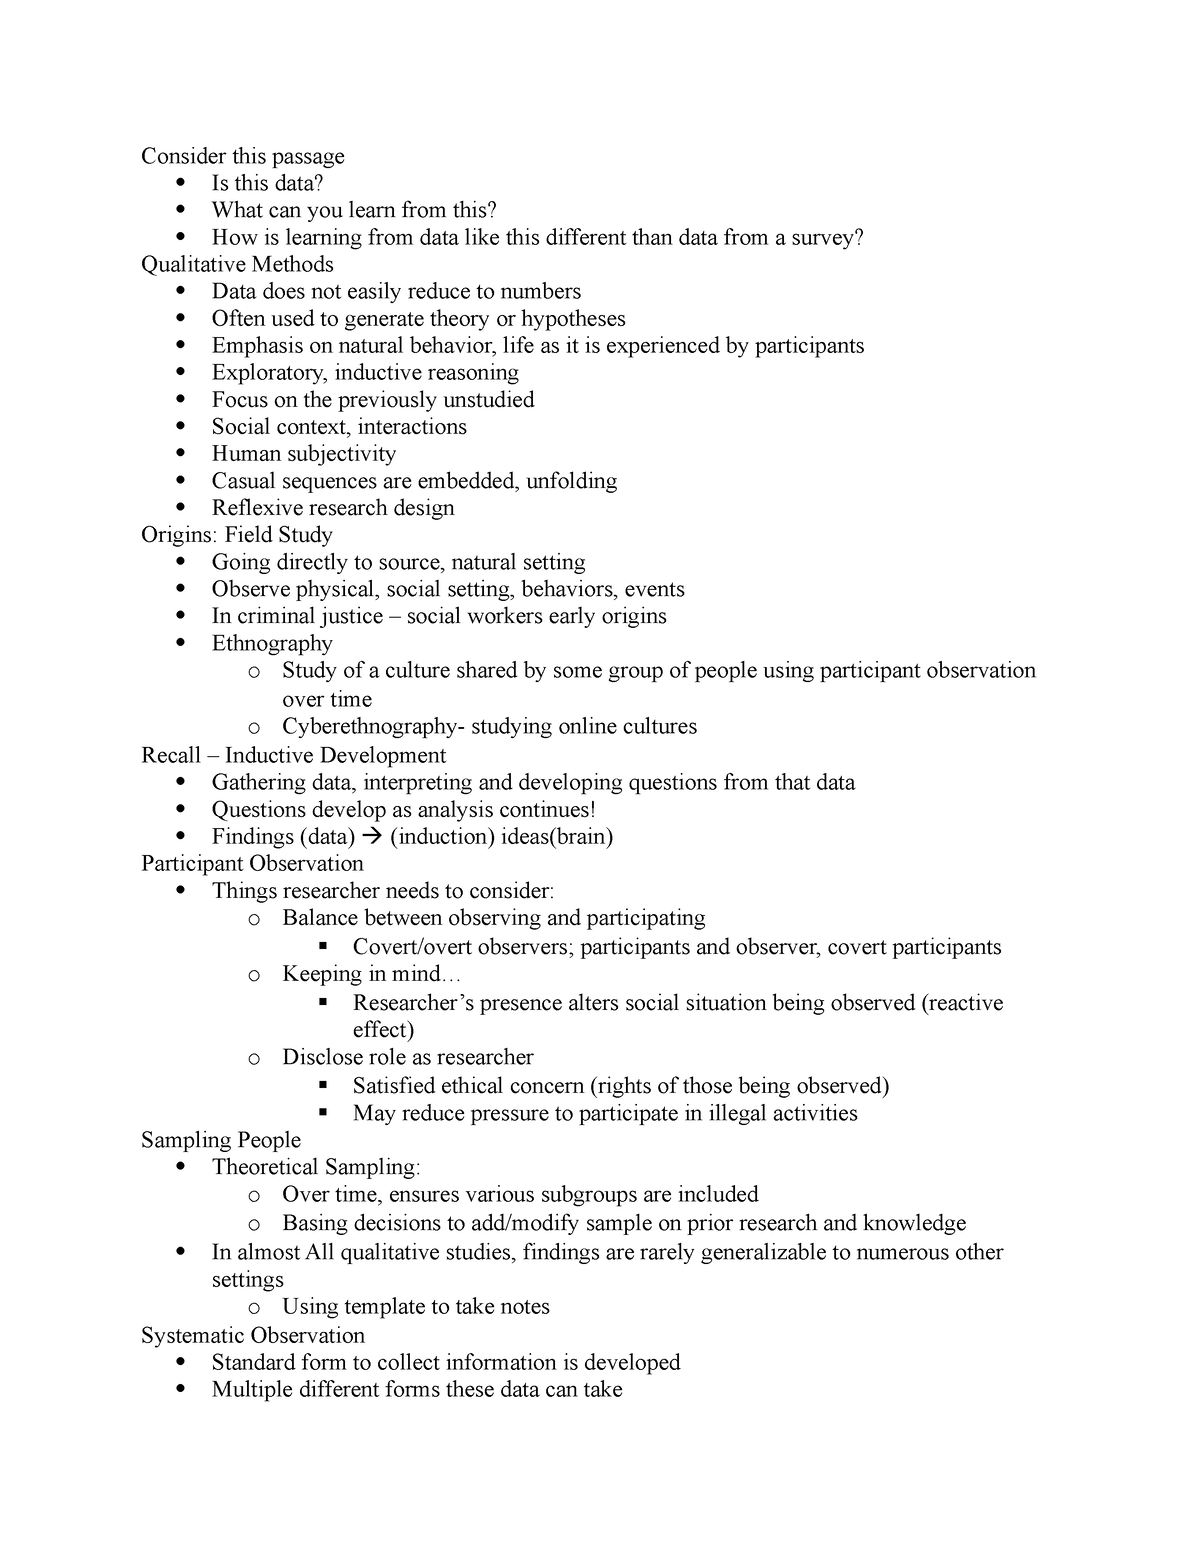 Qualitative Methods - Abnormal psychology notes - Consider this passage ...